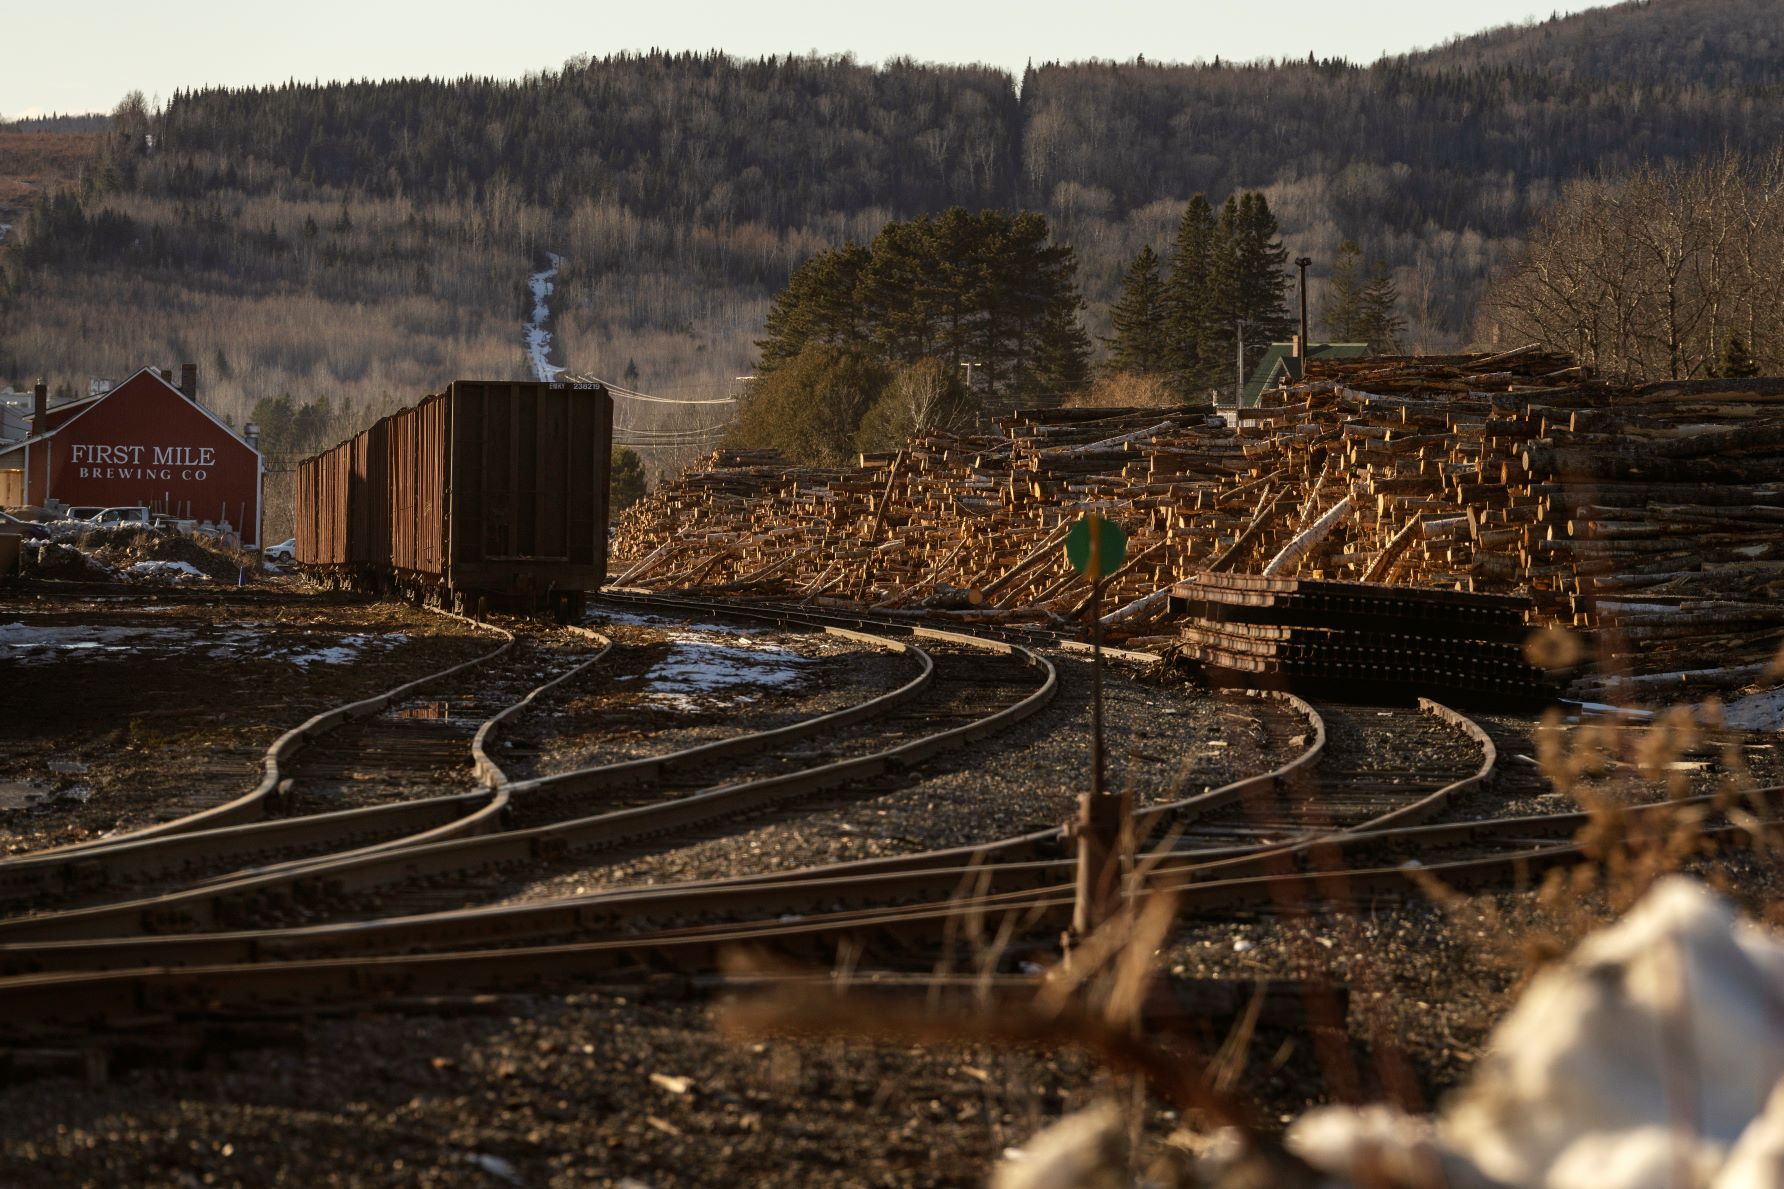 Train cars sit on railroad tracks with timber stacked off to the side.